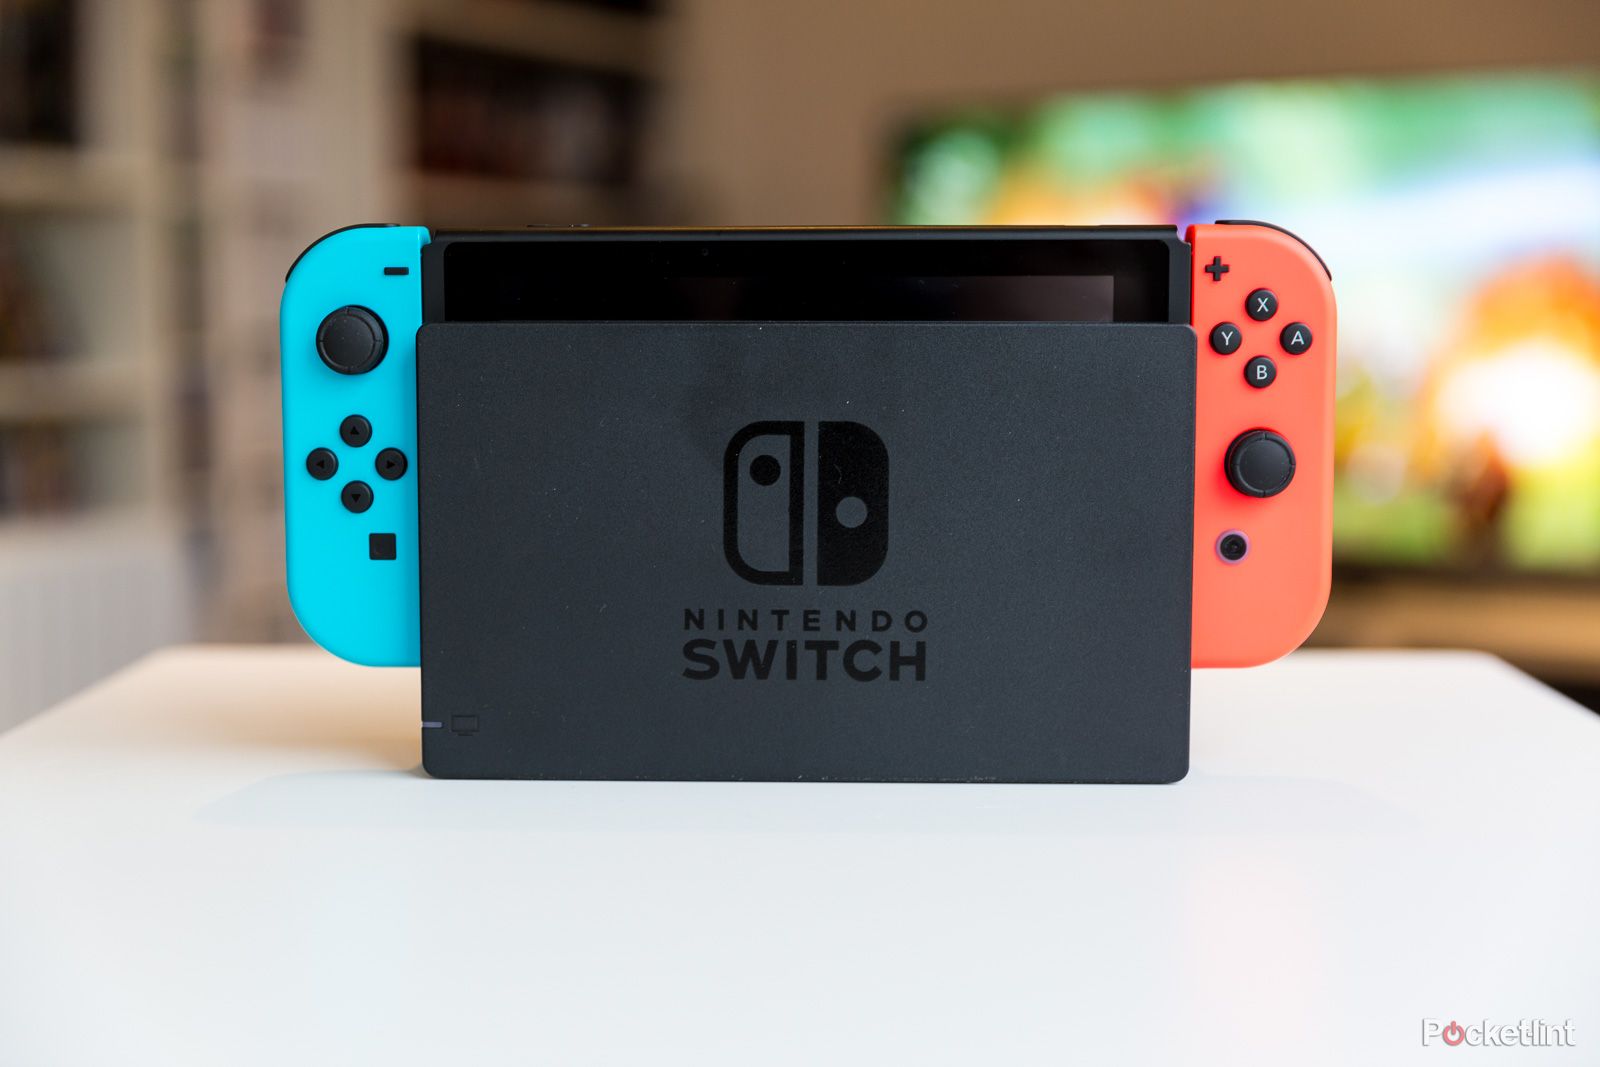 Nintendo Switch 12.0.1 update improves stability and may open up the console's Bluetooth capabilities photo 1